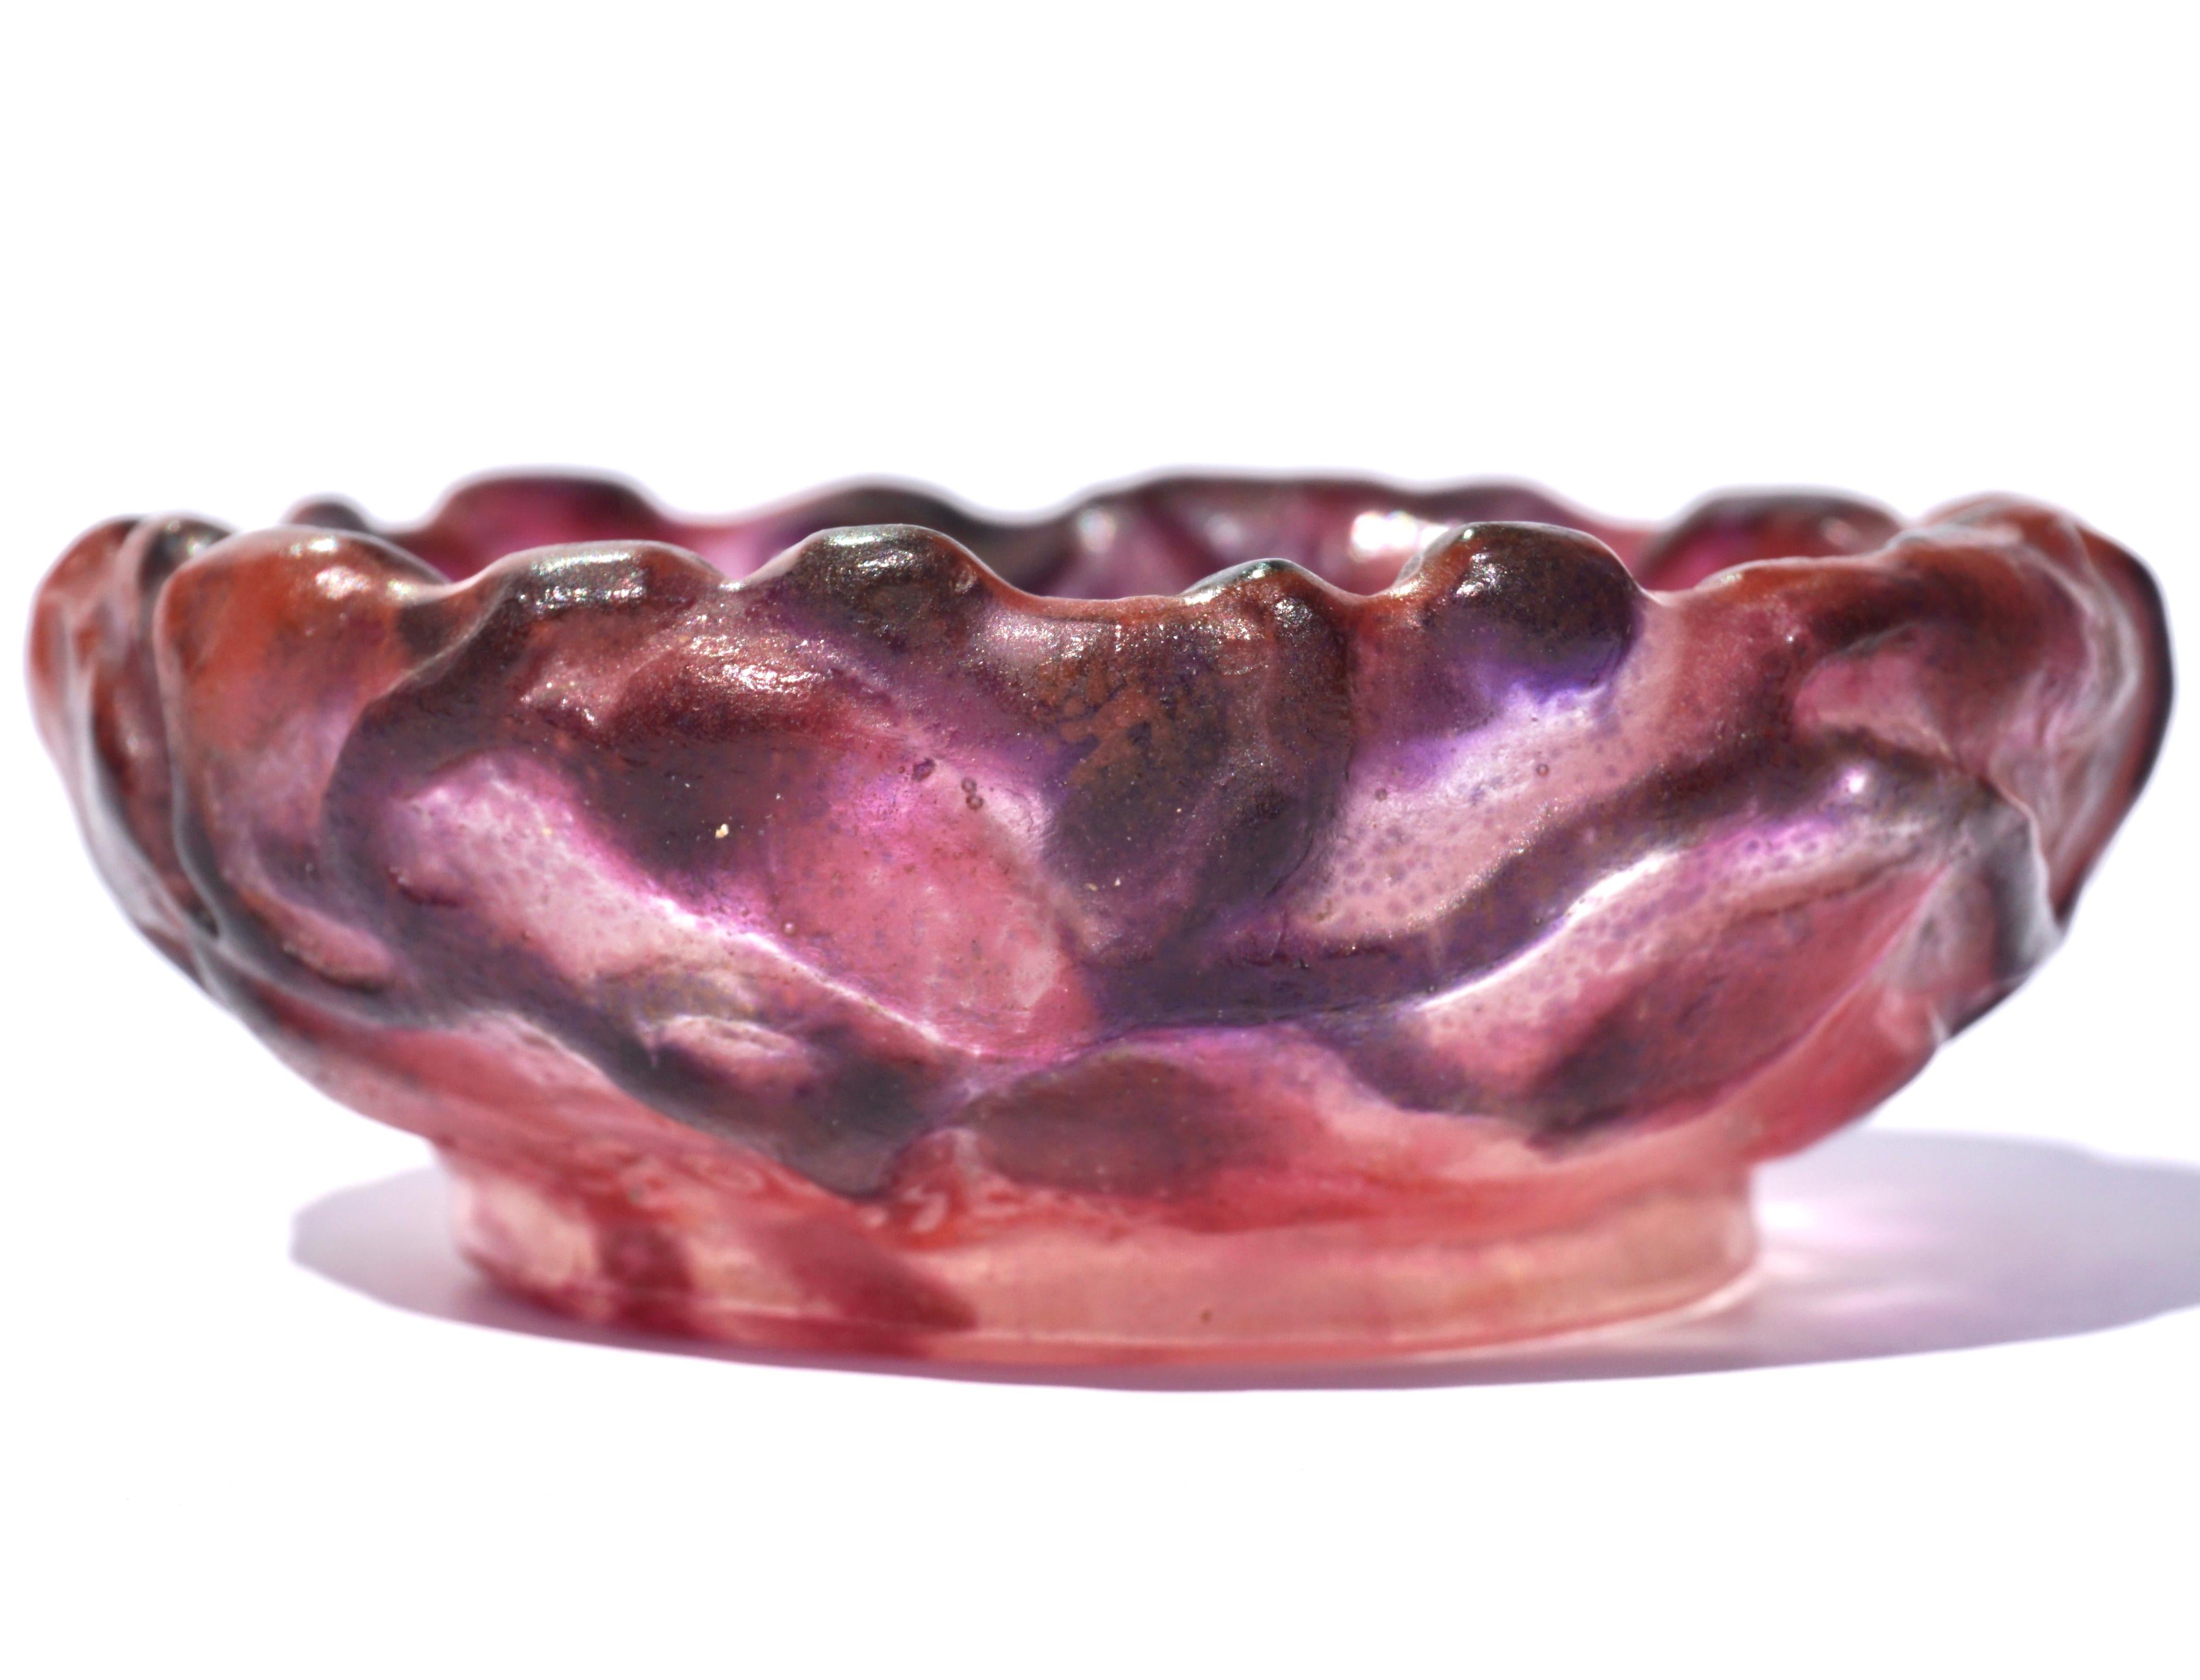 A wonderful red and purple French Art Nouveau bowl.
Pate de Verre glass 
Signed: G. Argy-Rousseau and 4899
Measures: Height: 1.35 inches 
Diameter: 3.5 inches 
 
Provenance: The Alan Schneider Collection

Condition: Excellent

AVANTIQUES is